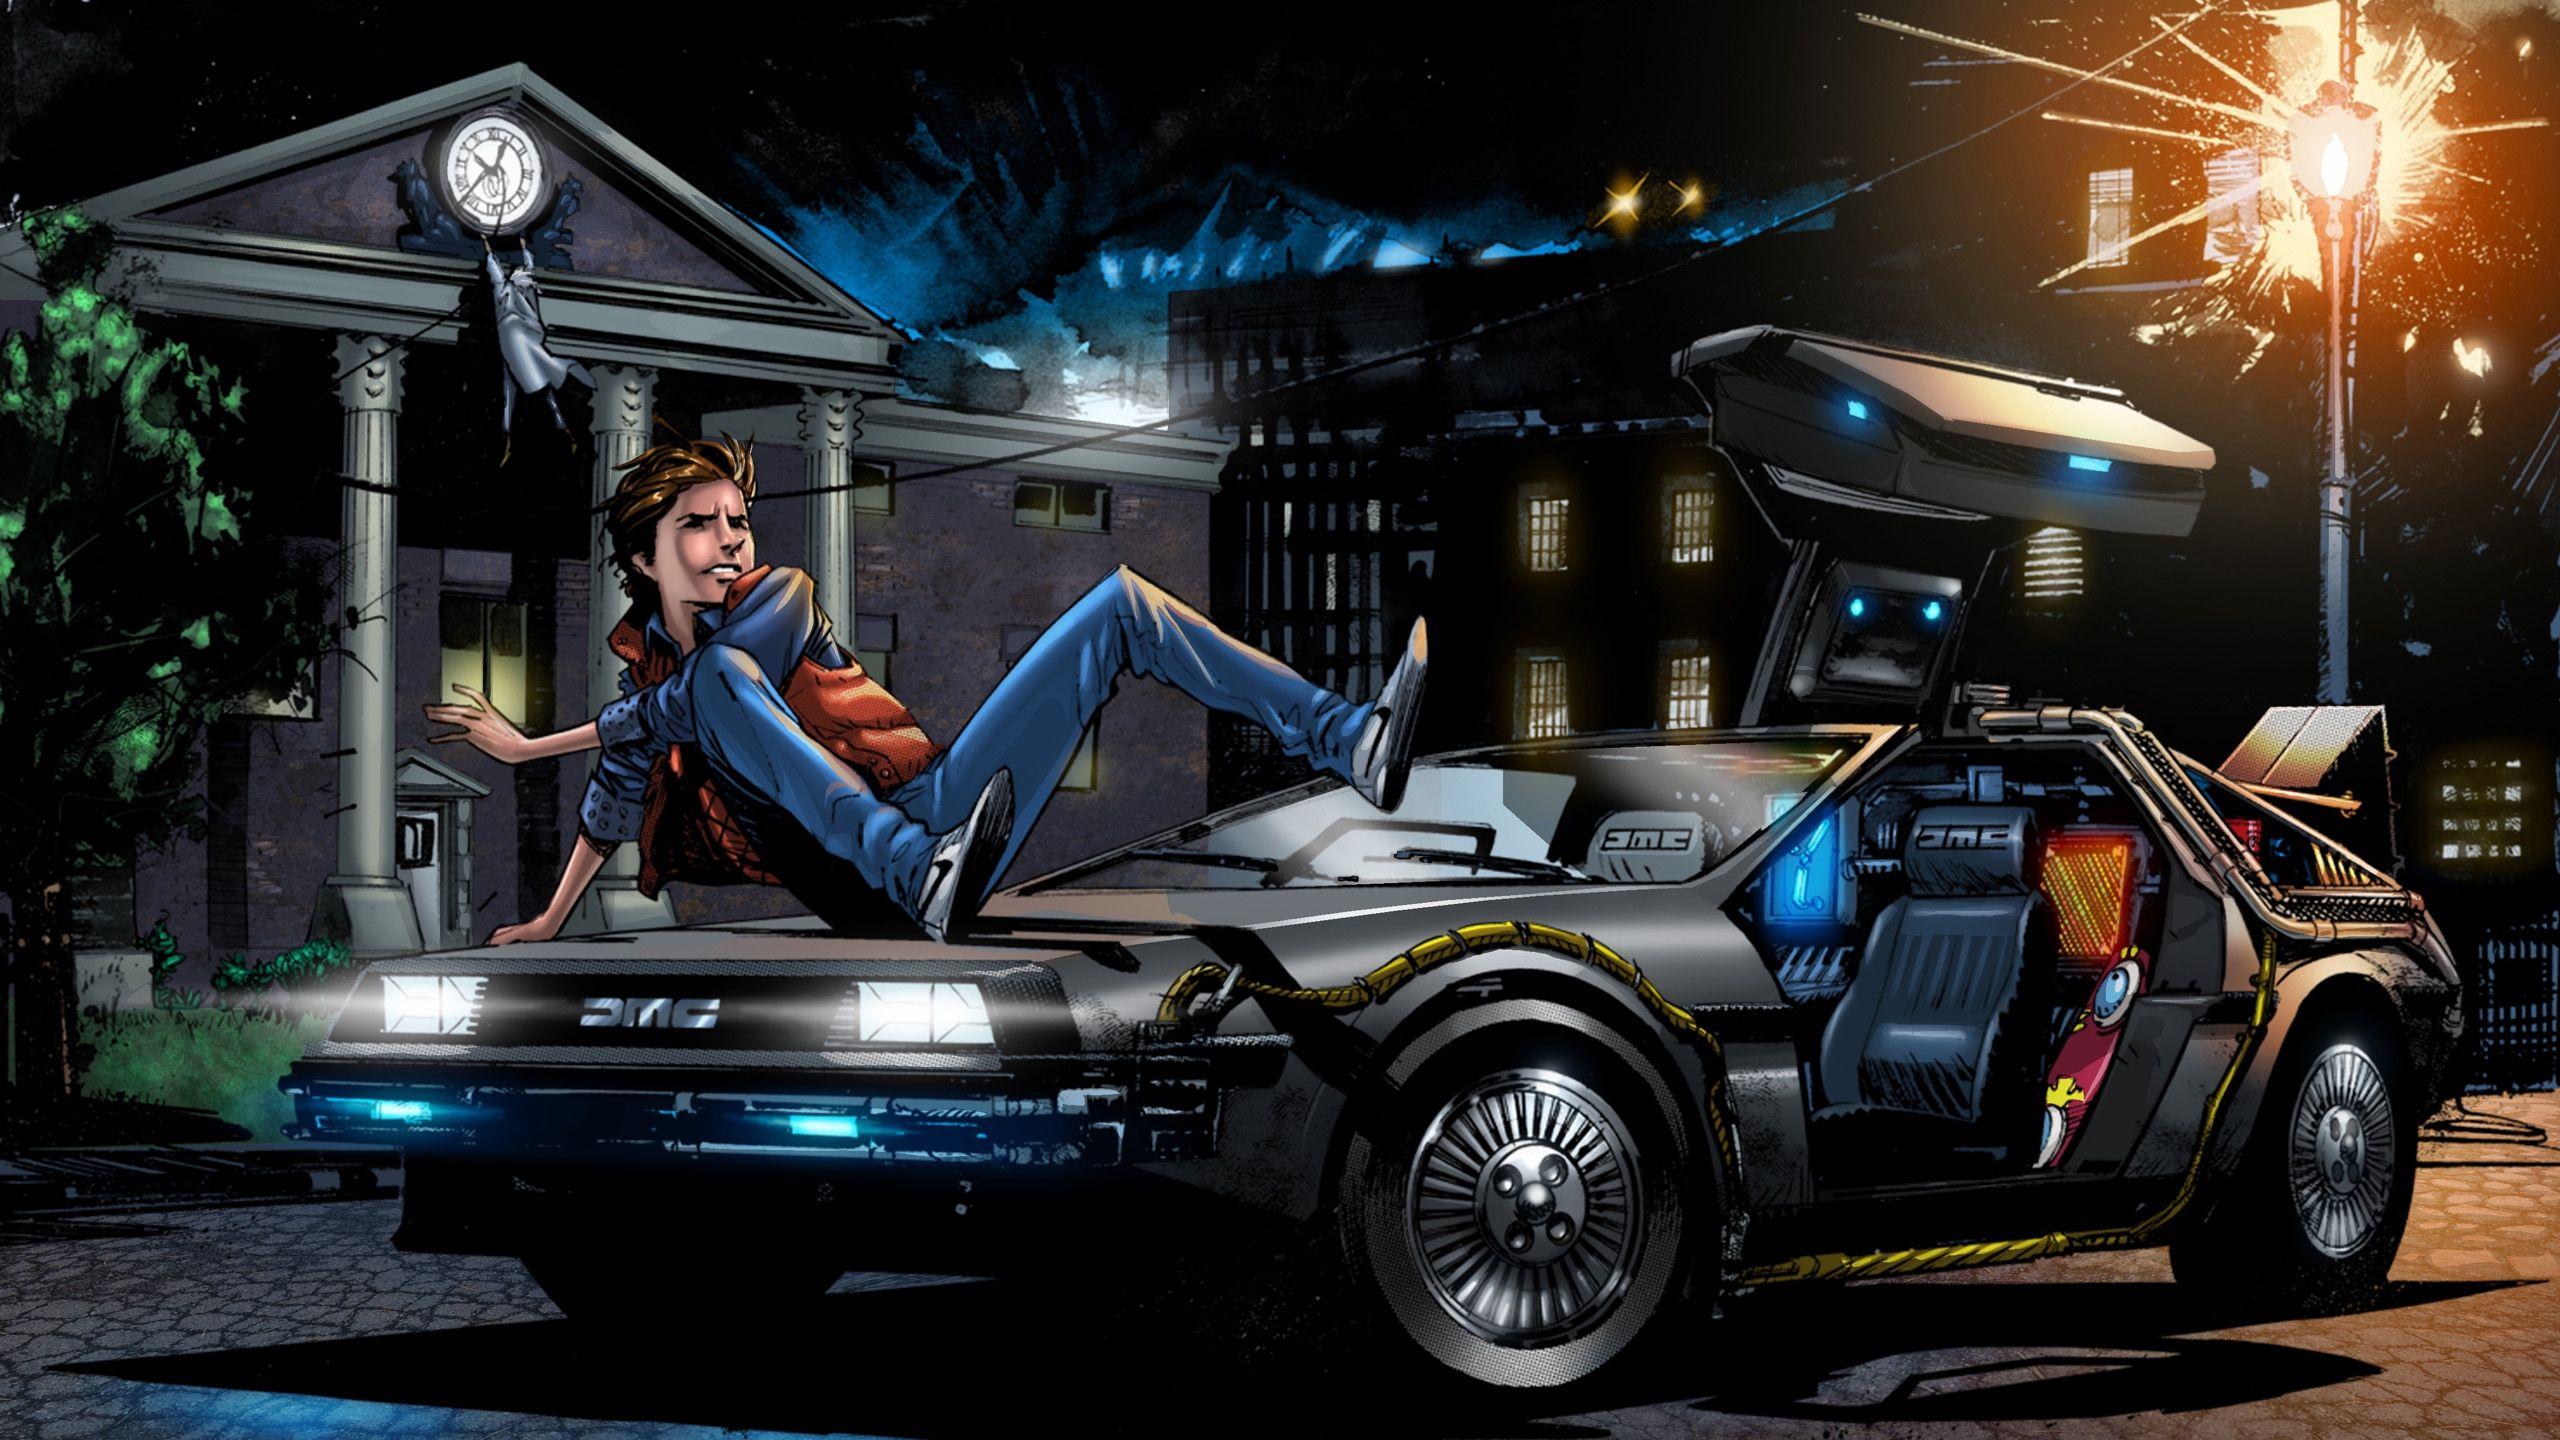 Download wallpaper 2560x1440 back to the future, marty mcfly, art